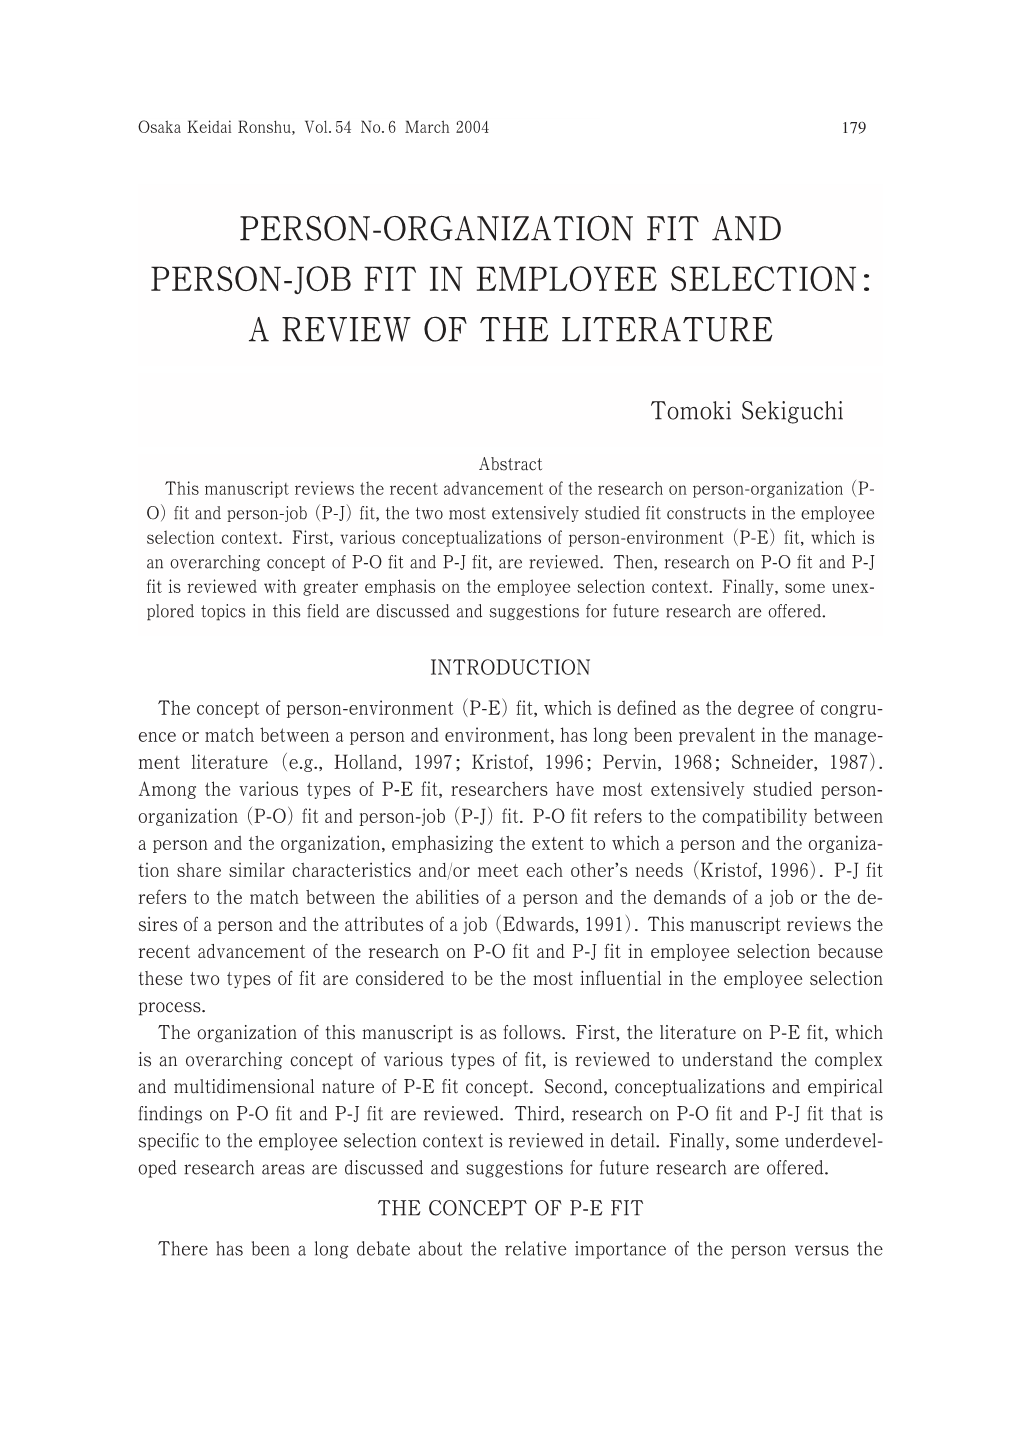 Person-Organization Fit and Person-Job Fit in Employee Selection : a Review of the Literature